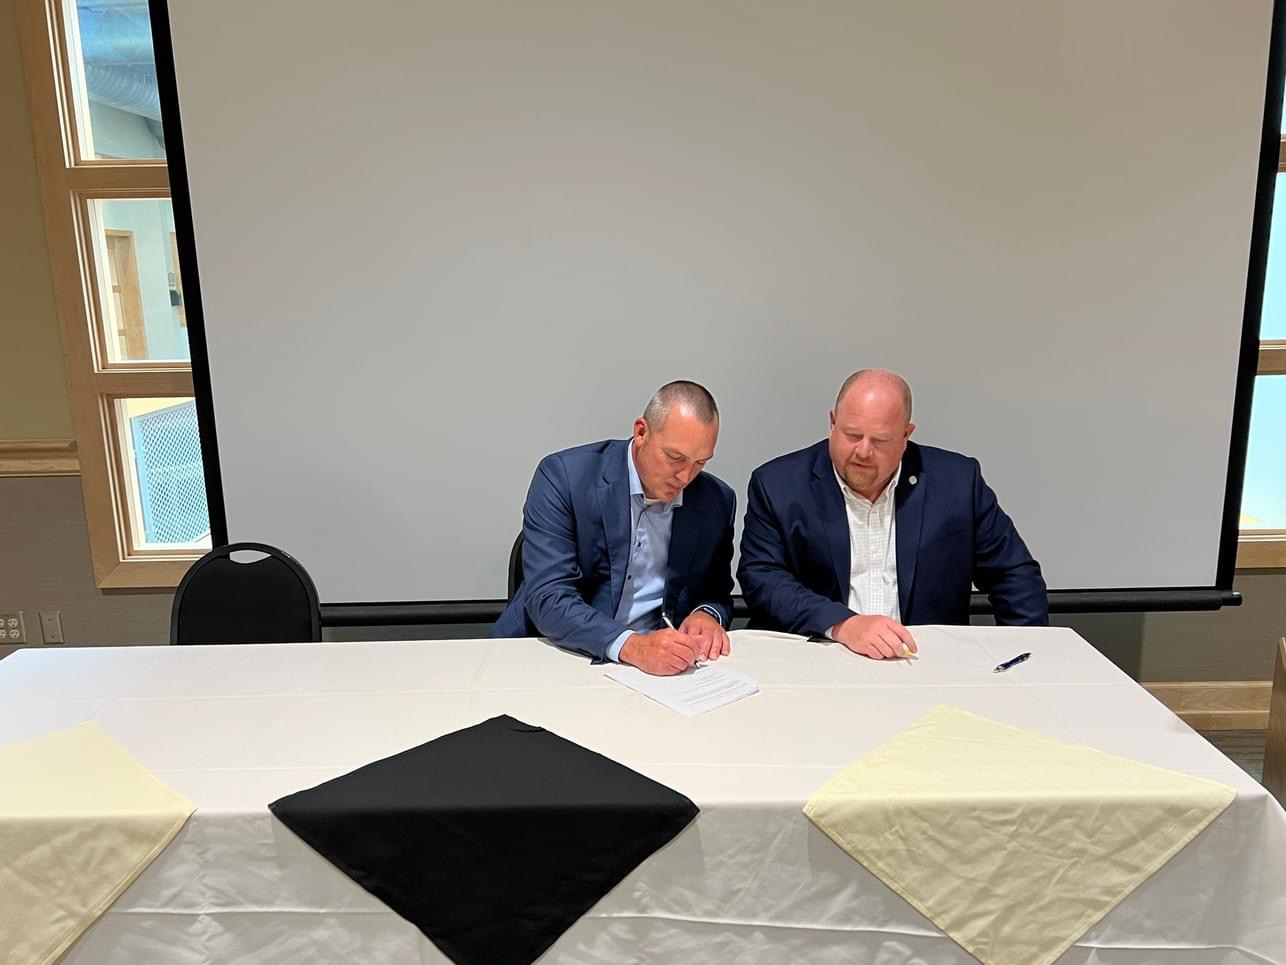 SCCC, GCCC Sign MOU to Form Partnership on CDL Program